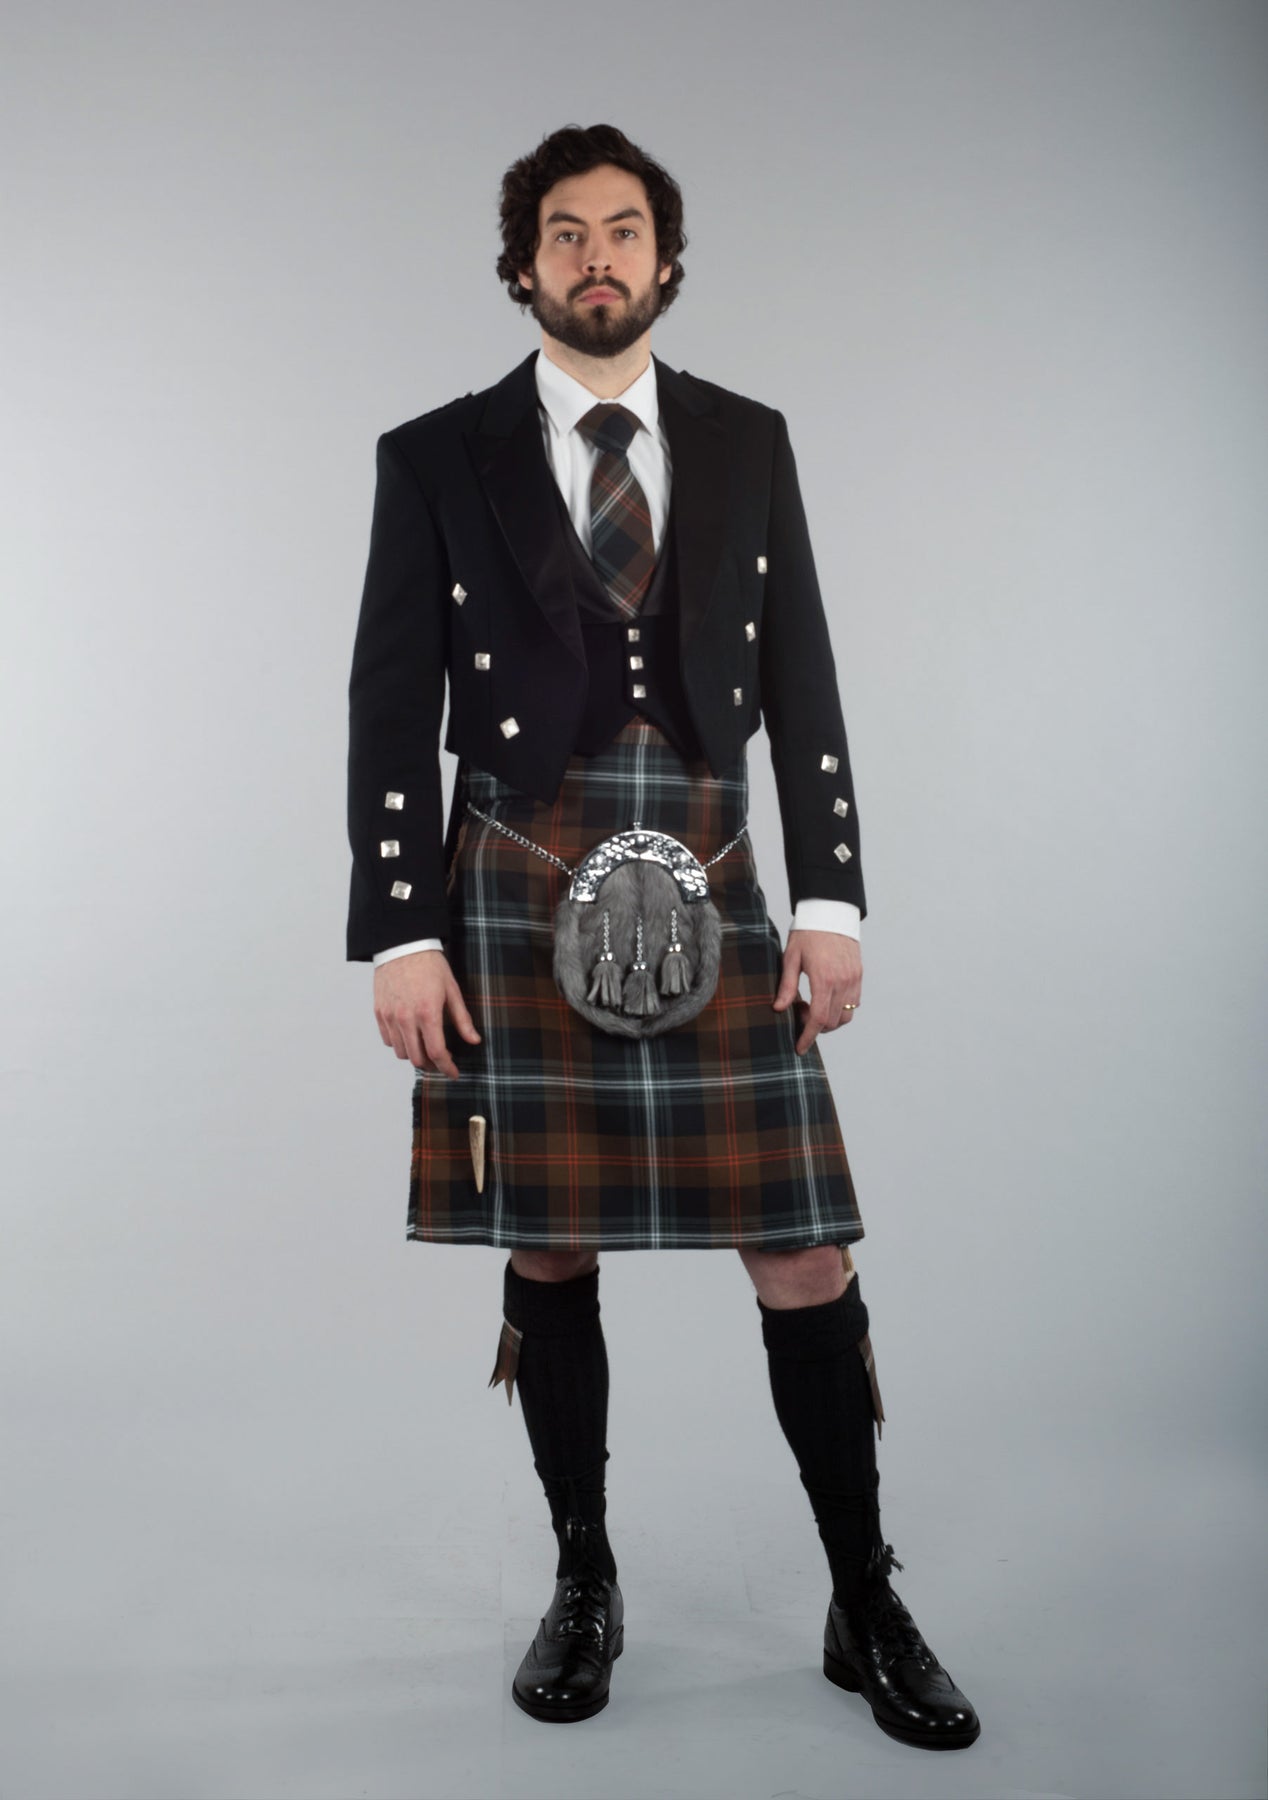 Persevere Weathered Brown Prince Charlie Kilt Outfit Kilt Society™